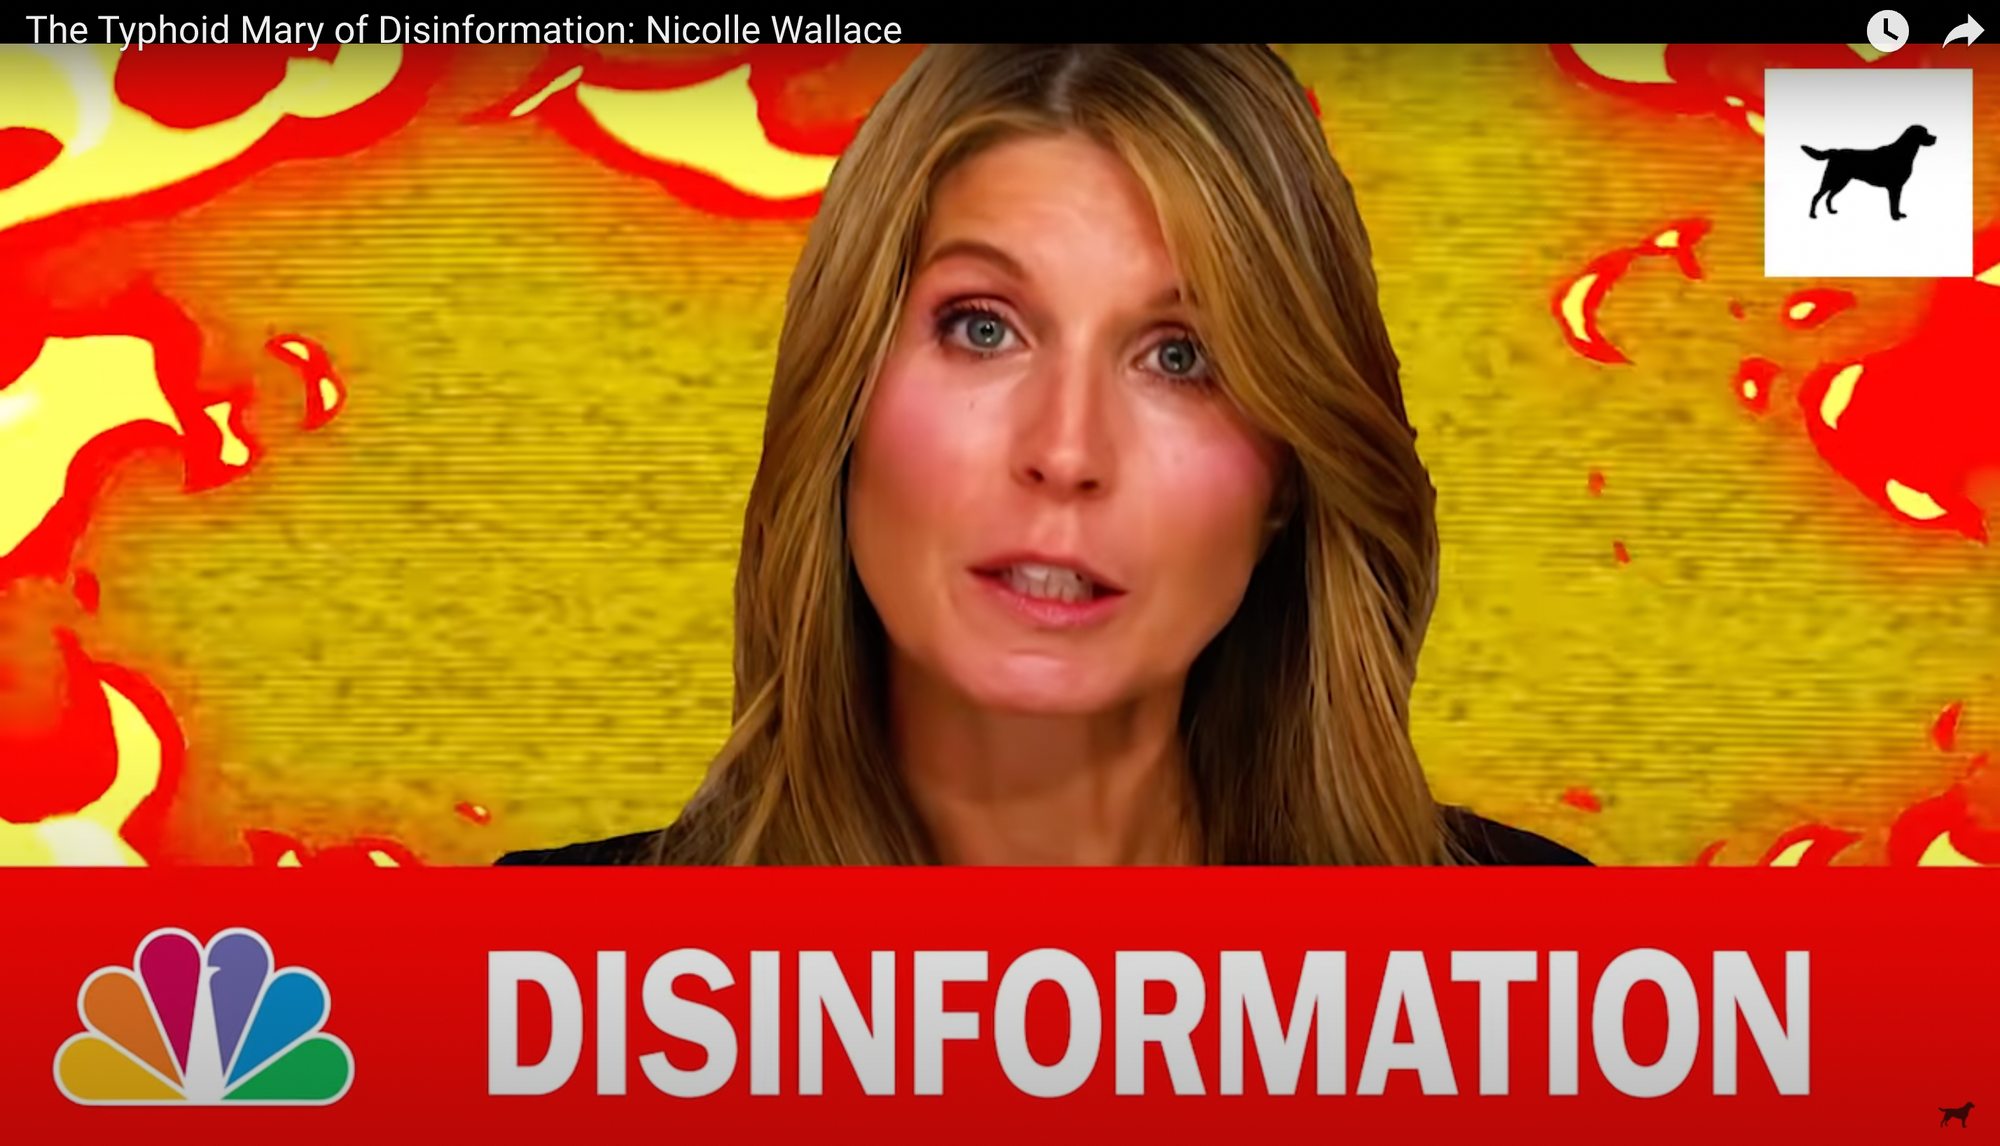 "The Typhoid Mary of Disinformation": Nicolle Wallace. Nobody Spreads it More Relentlessly.